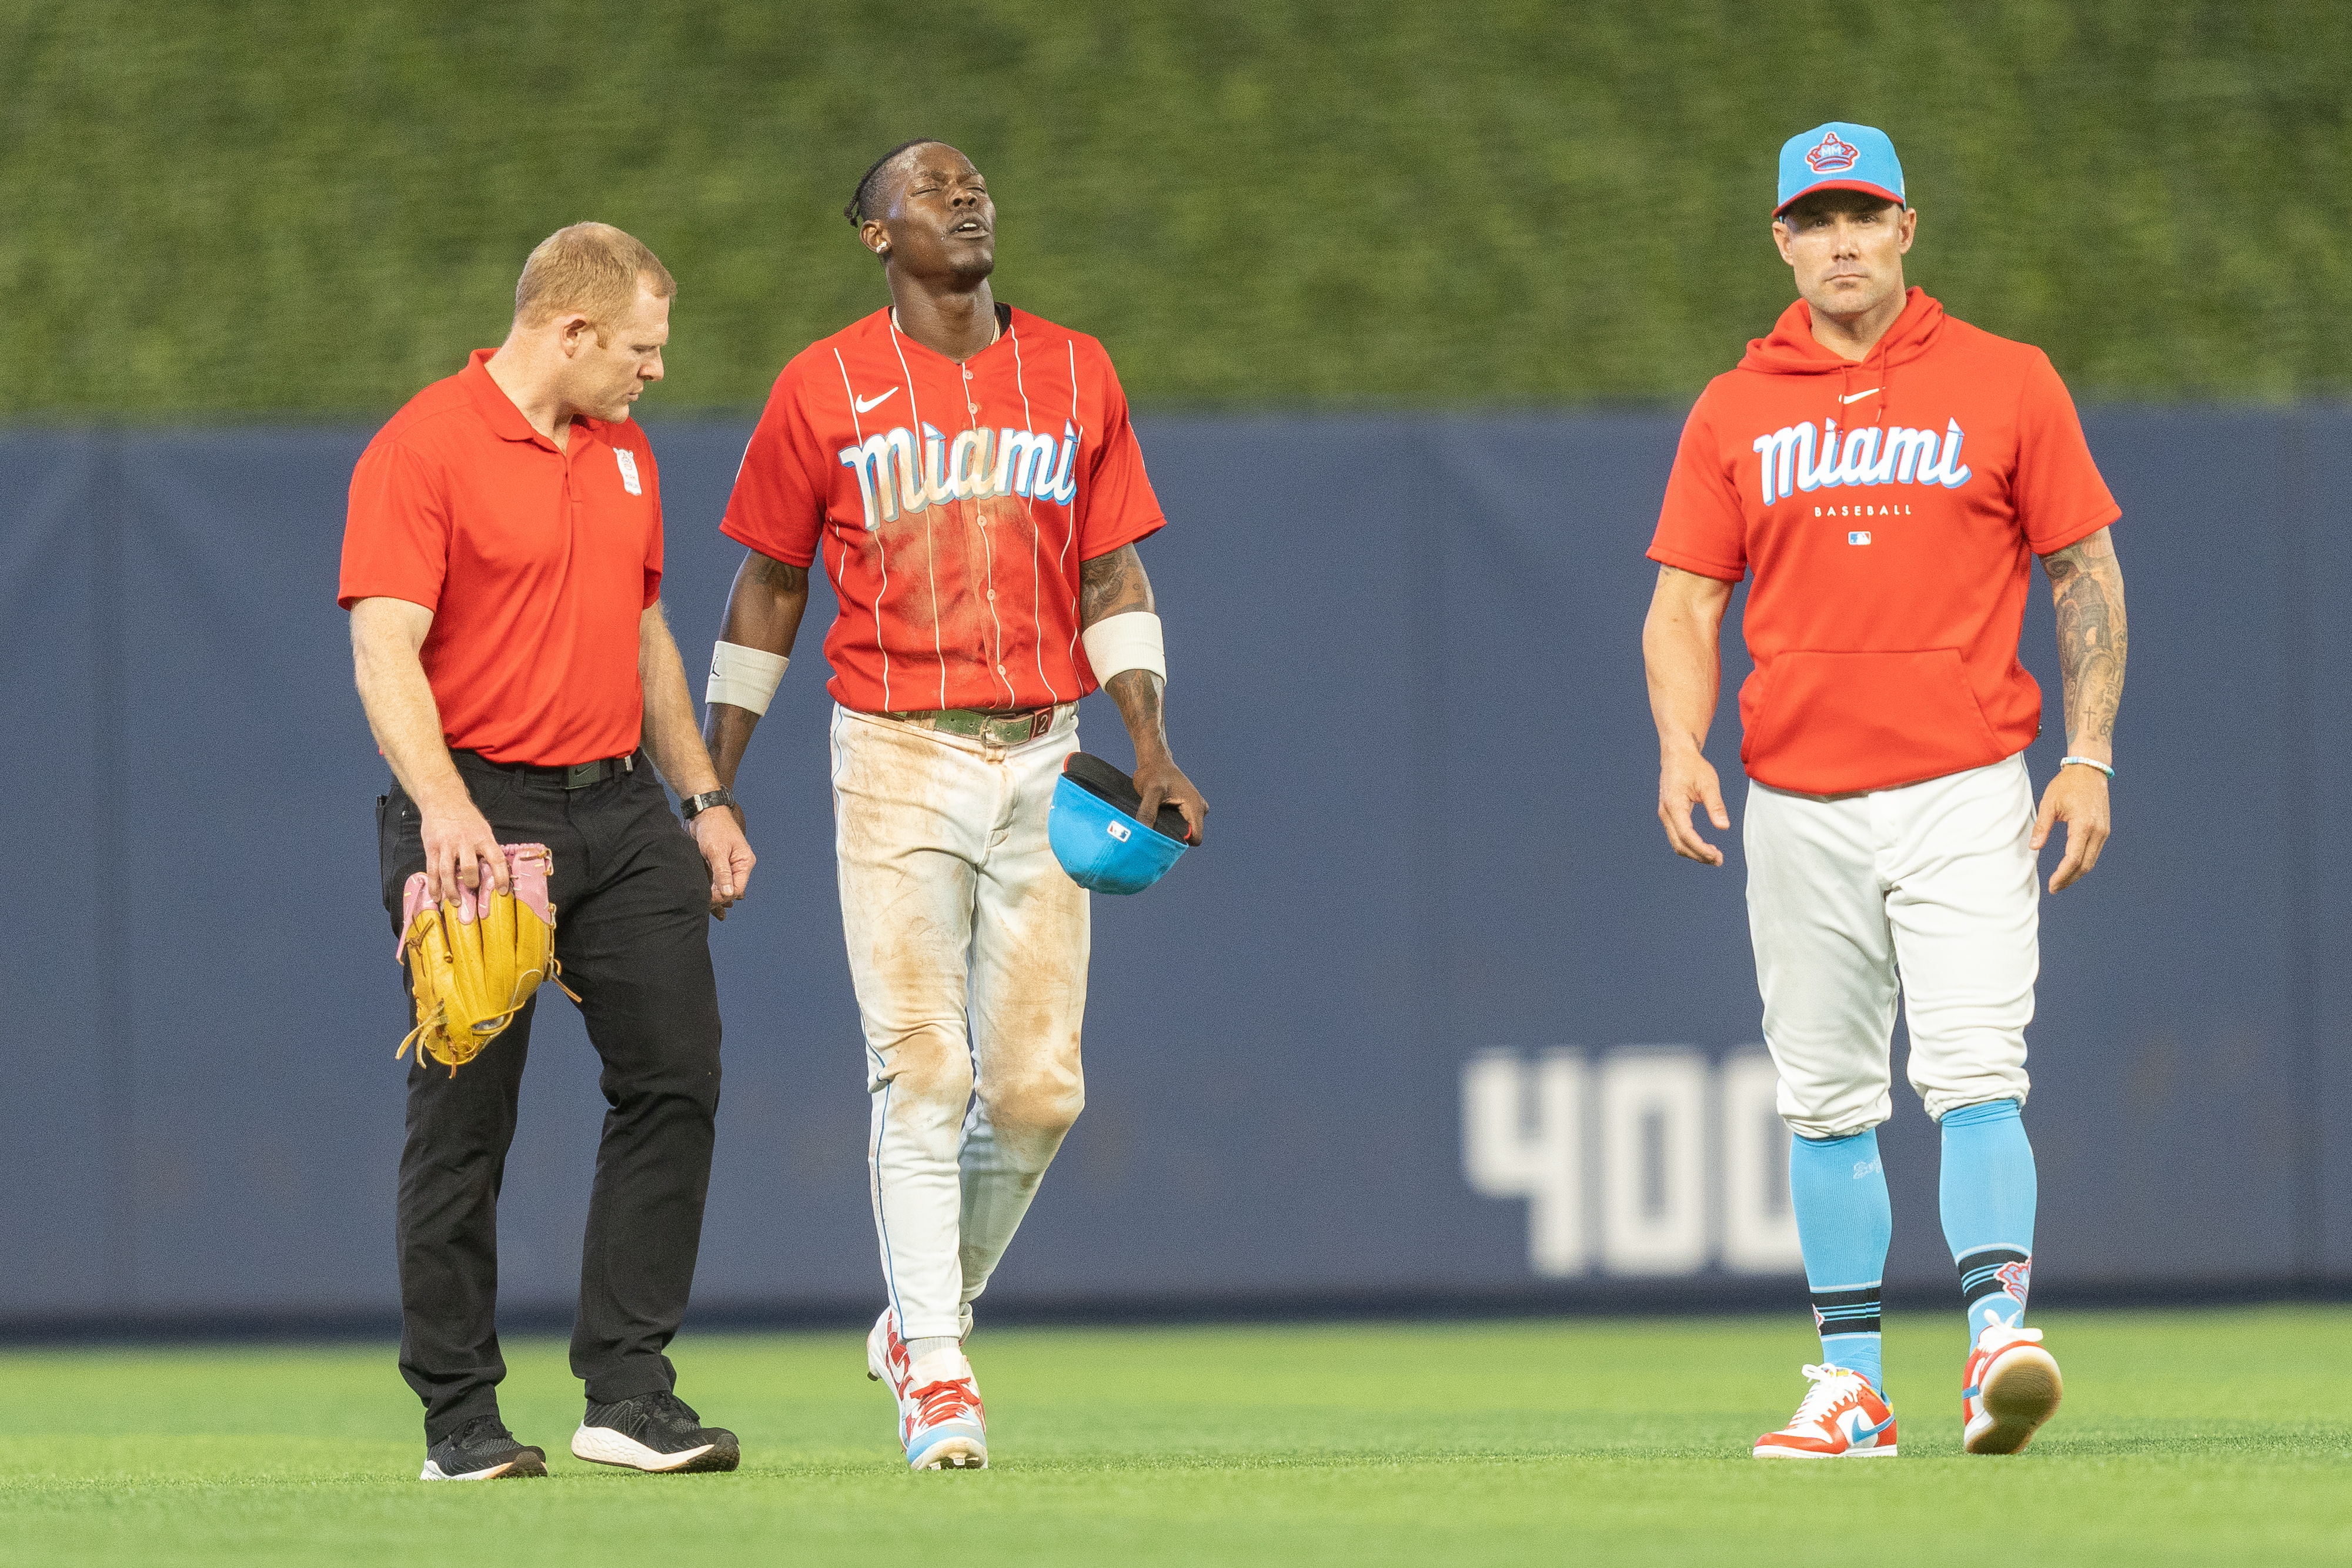 Jazz Chisholm Jr. #2 of the Miami Marlins walks off the field in the eighth inning after being injured during a play in the outfield against the Cincinnati Reds at loanDepot park on May 13, 2023 in Miami, Florida.